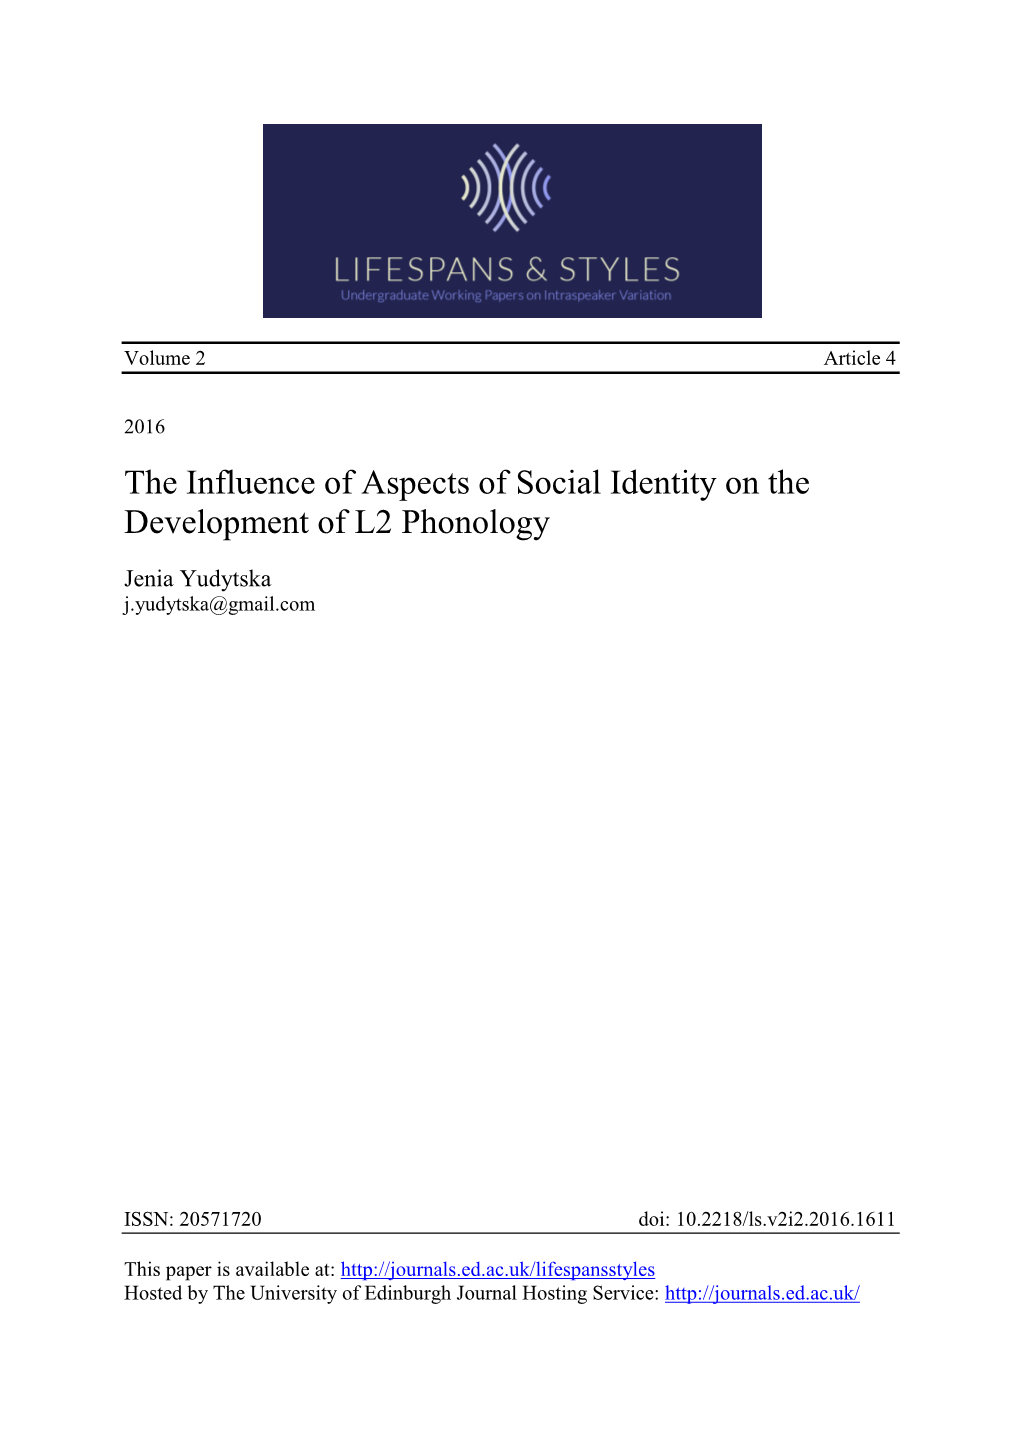 The Influence of Aspects of Social Identity on the Development of L2 Phonology